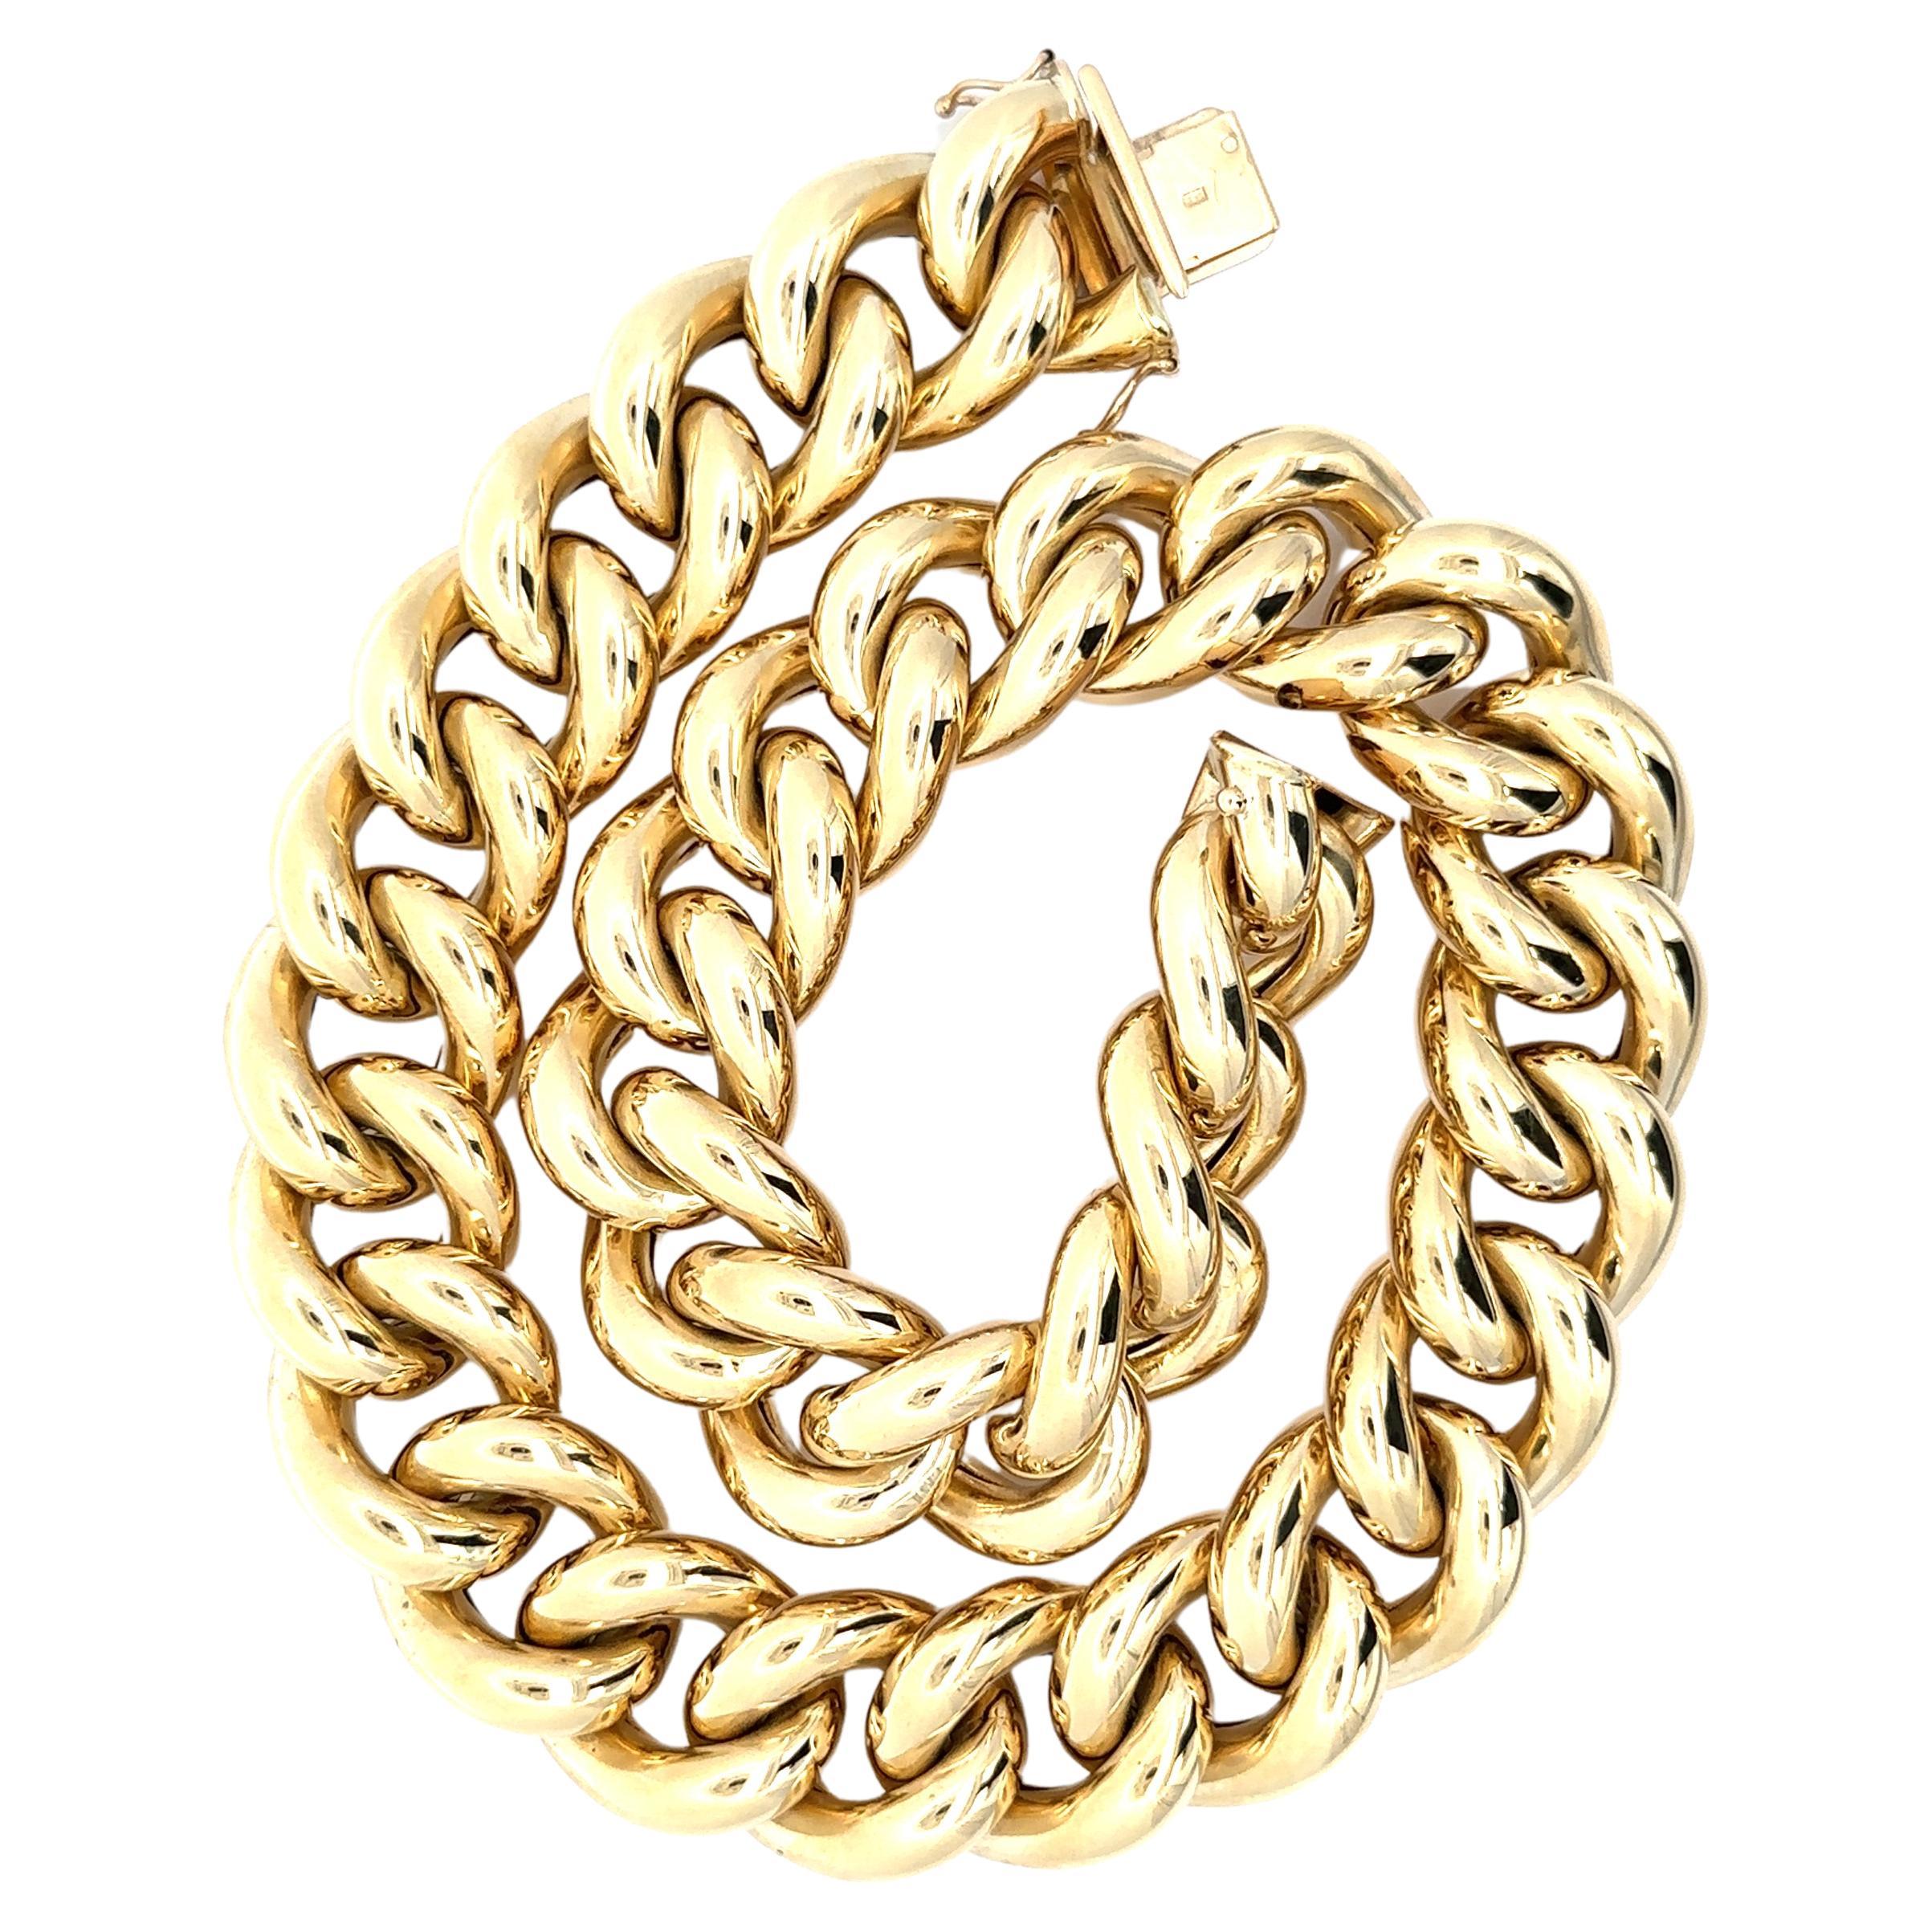 Italian Unique 14K Gold 17" 20mm Polished Puffed Curb Cuban Link Chain Necklace